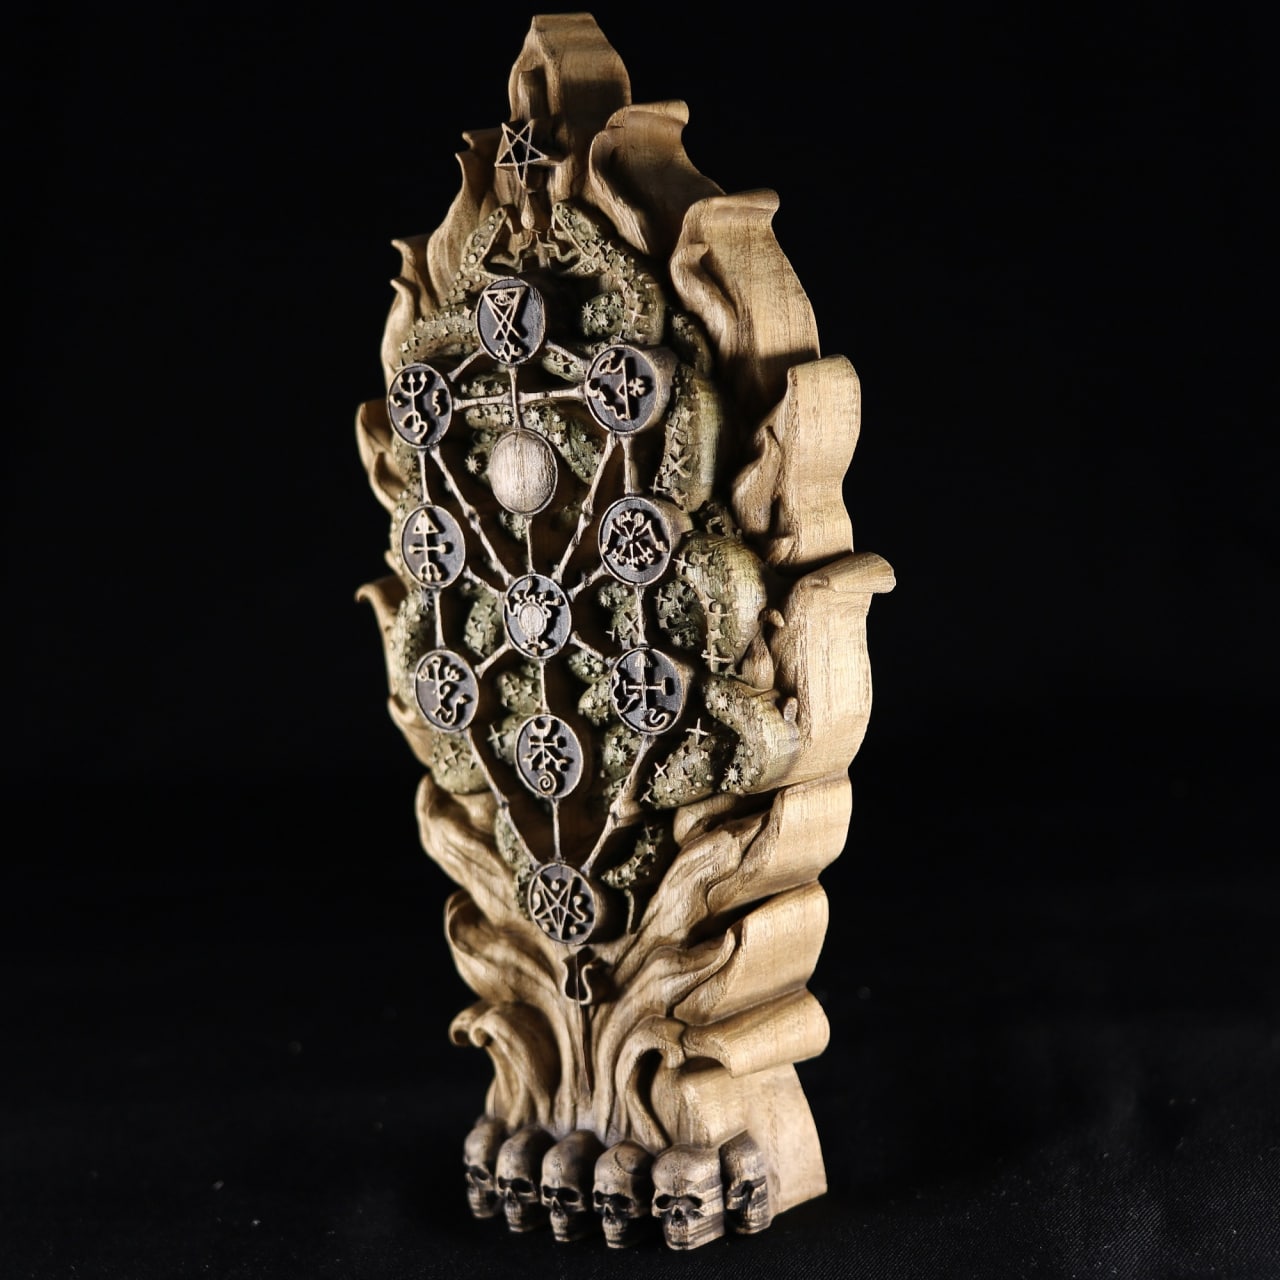 Qliphoth, The tree of knowledge, The tree of death, wooden statue